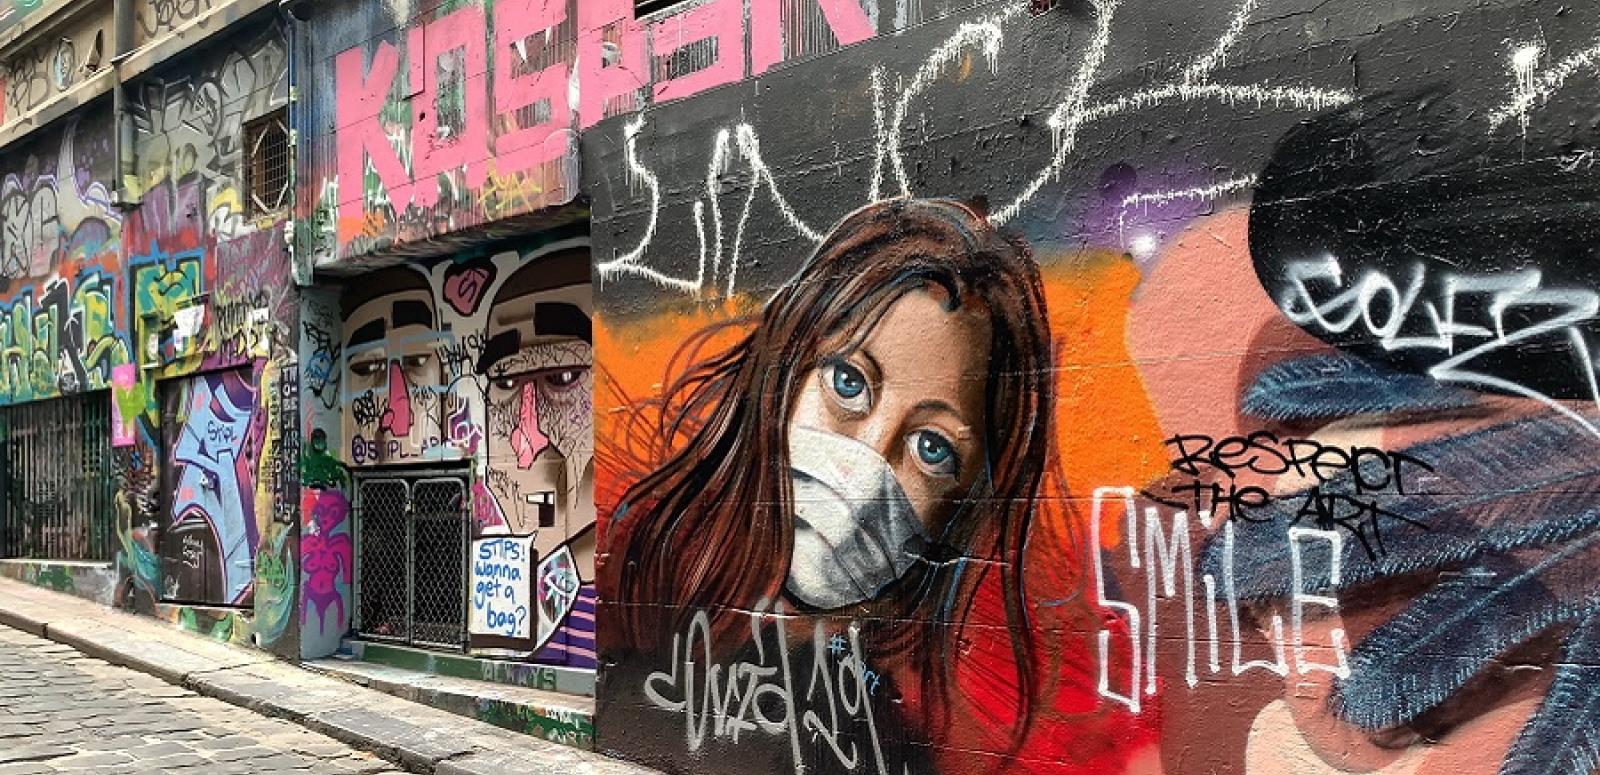 A graffitti painted on a wall, showing a youg woman wearing a face mask and the word SMILE, taken from the Australia Locked Down project.